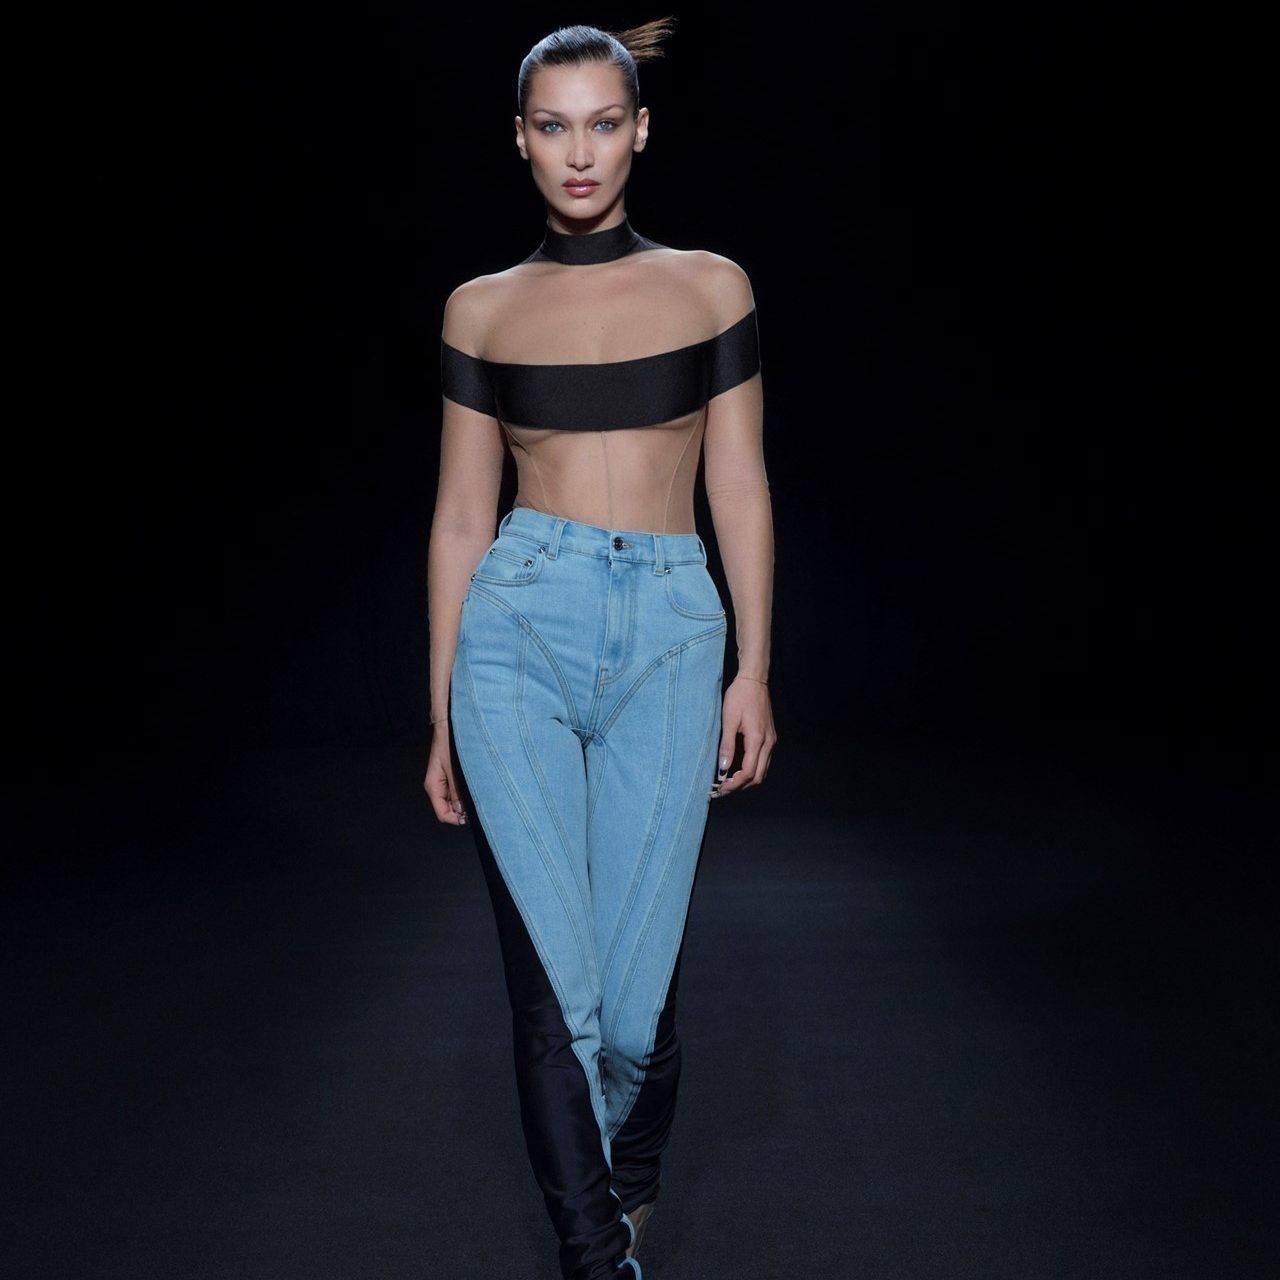 Mugler Returns to The Runway After an Absence of Three Years